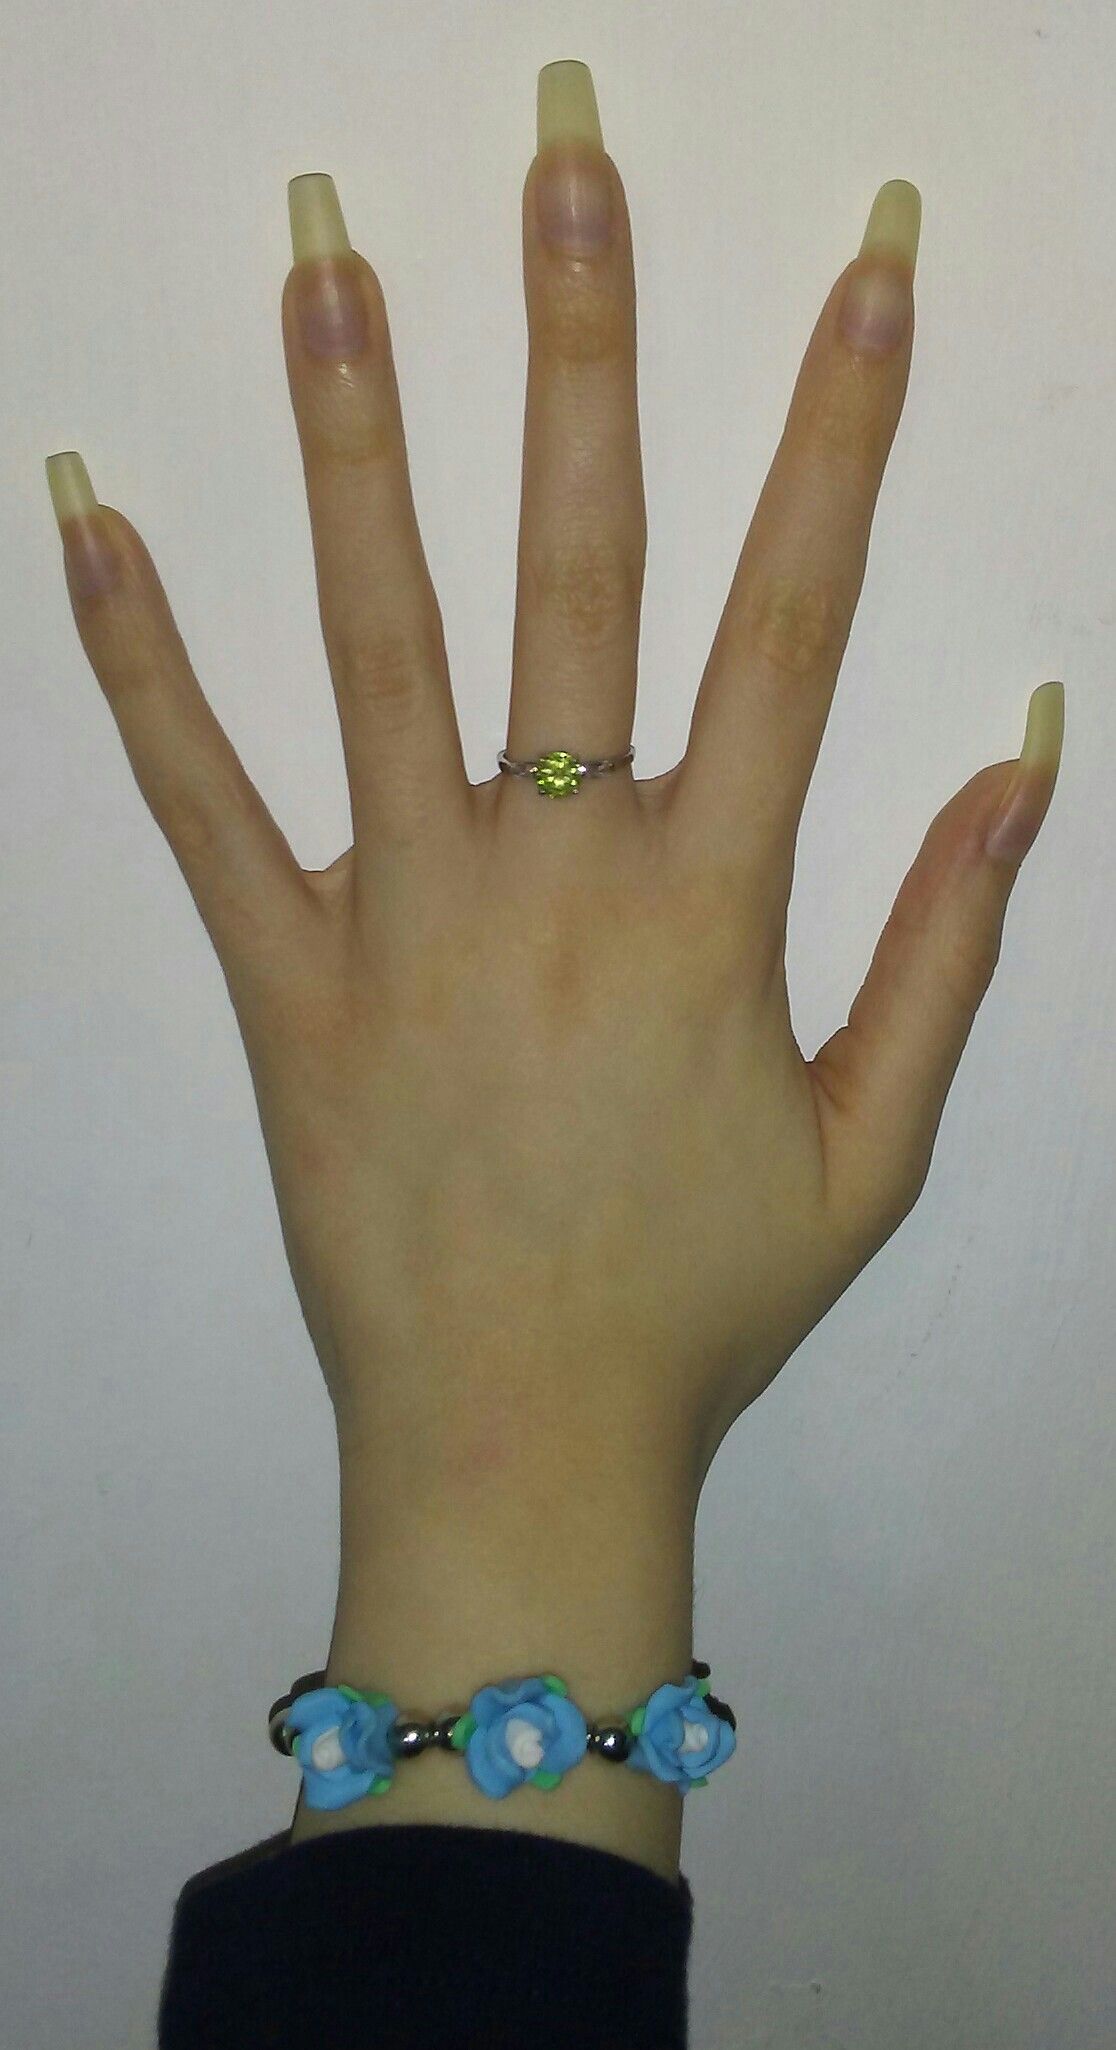 Very Lovely Peridot Sterling Silver Ring!